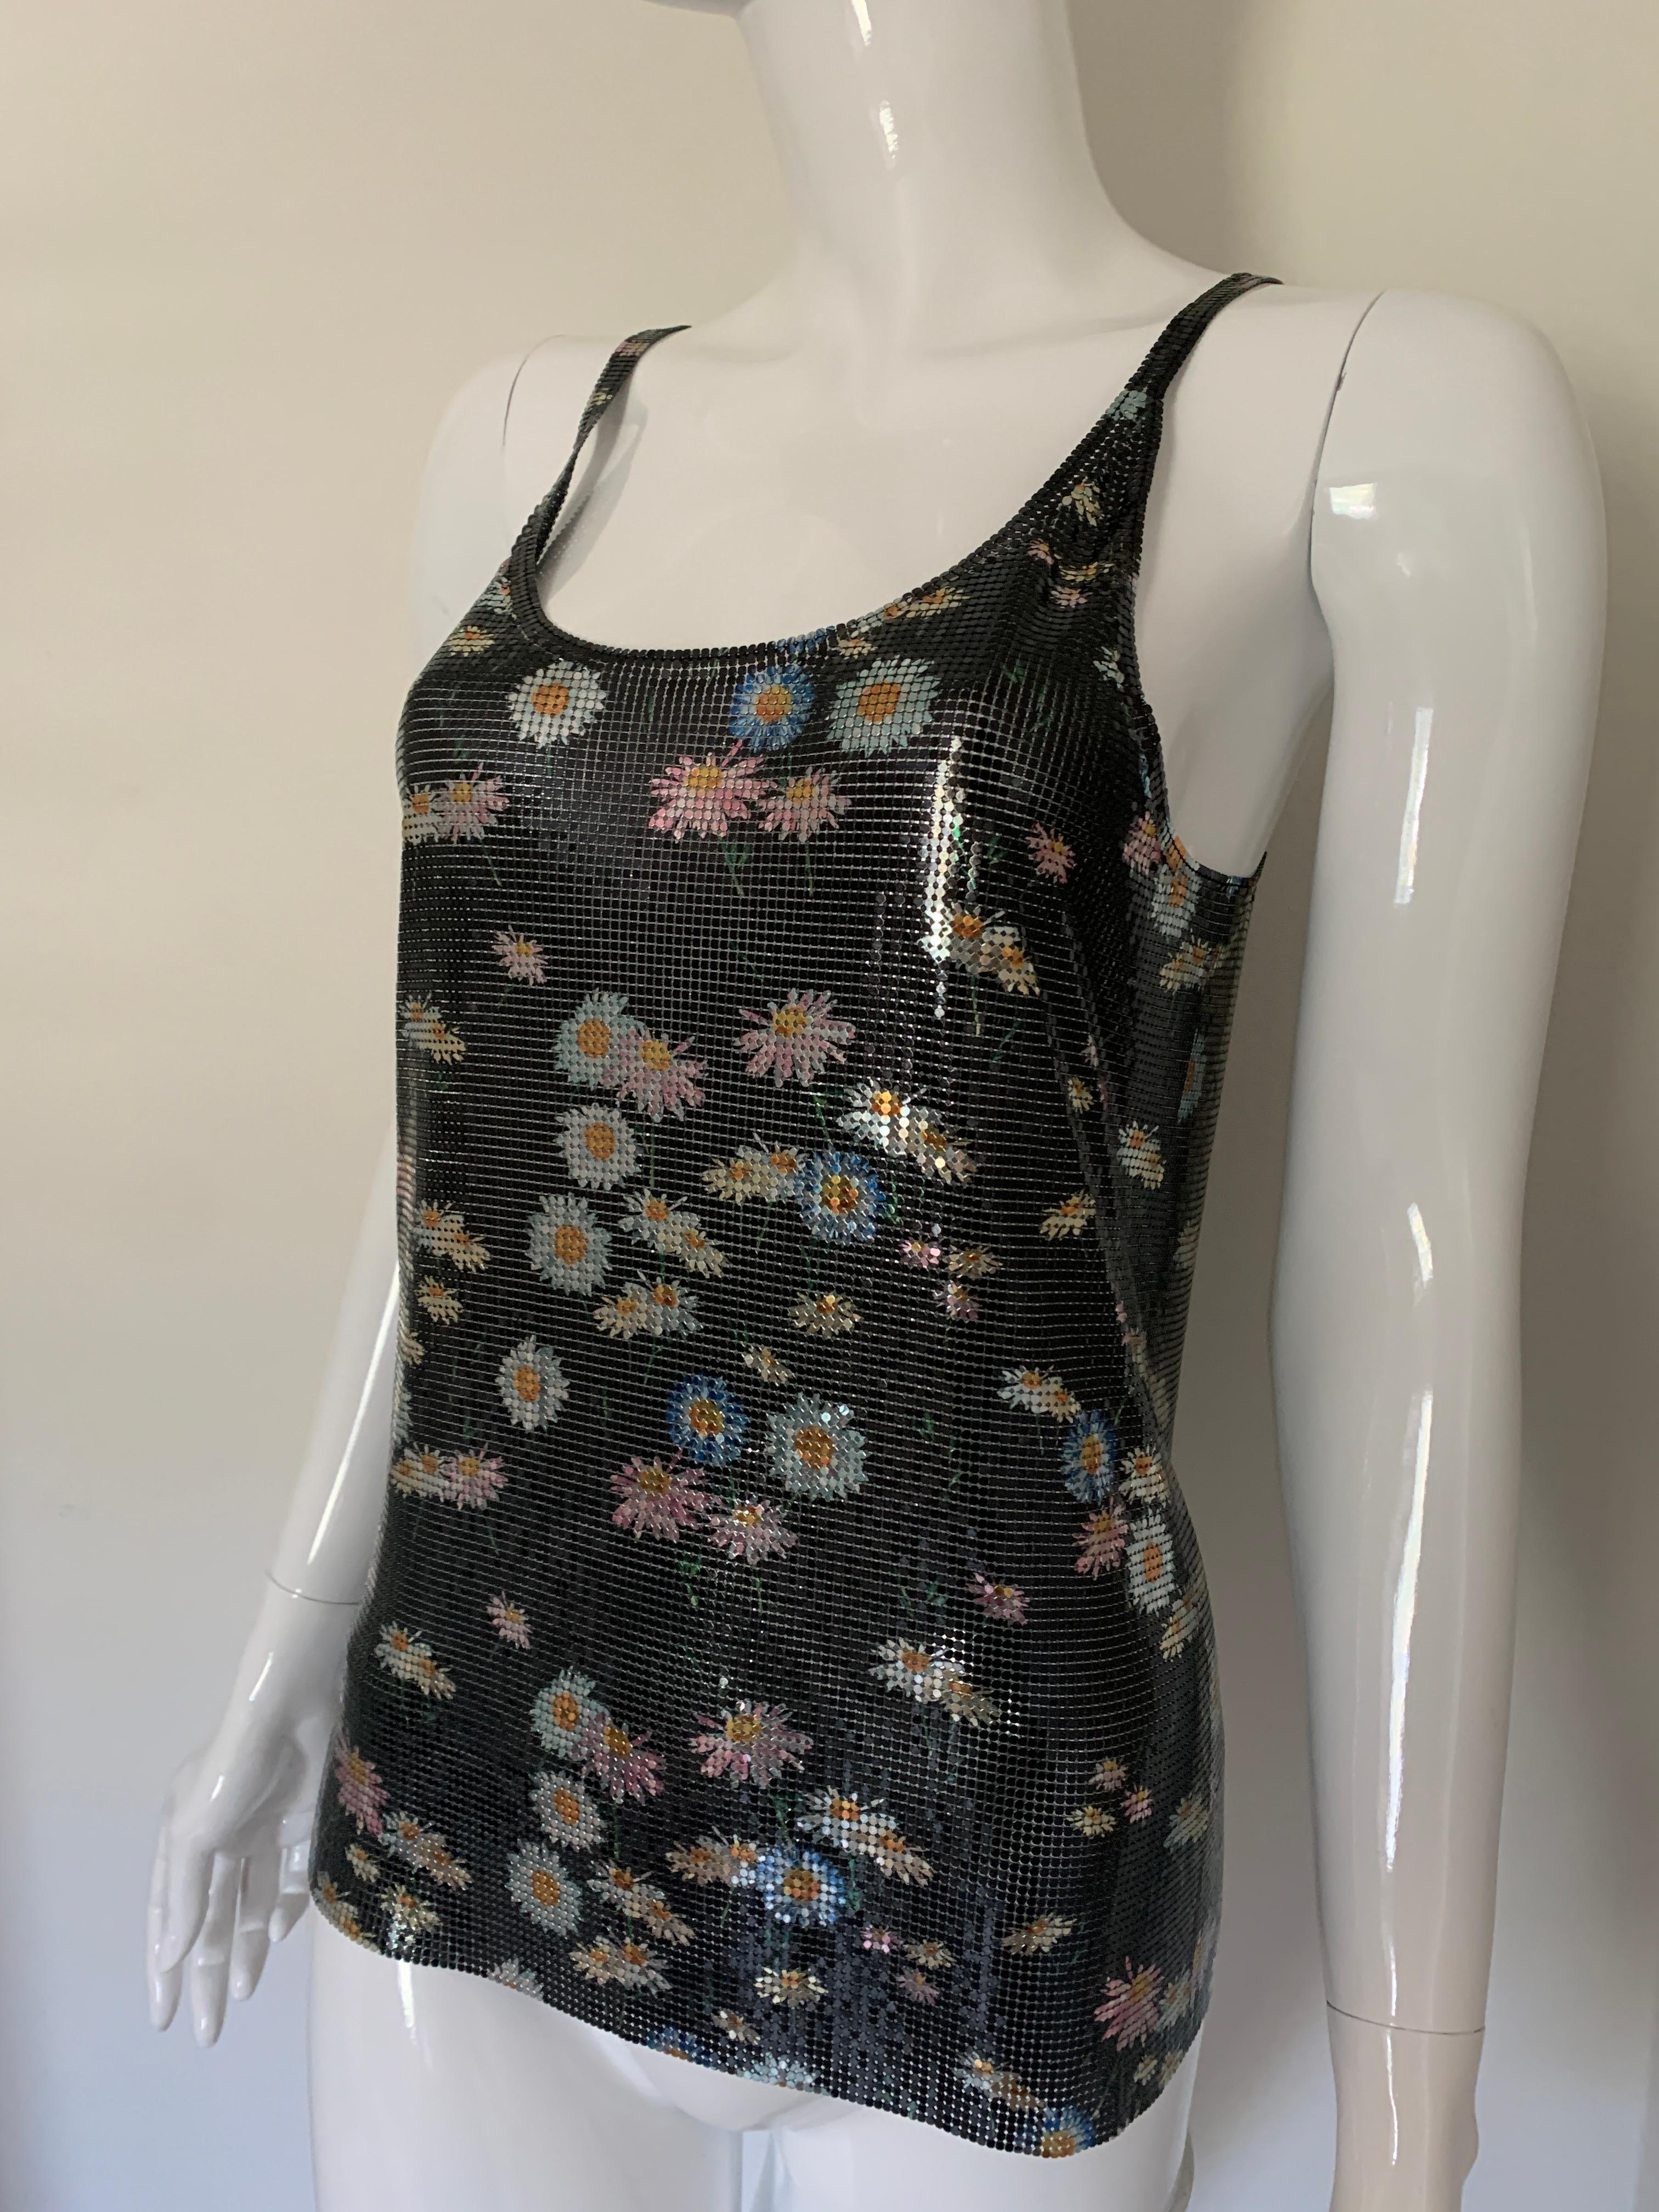 Multicolour aluminium floral chainmail top from Paco Rabanne featuring a floral print, a scoop neck, a sleeveless design, a scoop back and a straight hem.
Aluminium 100%
Made in France
Size Small 

Retail $7161

No signs of wear. 